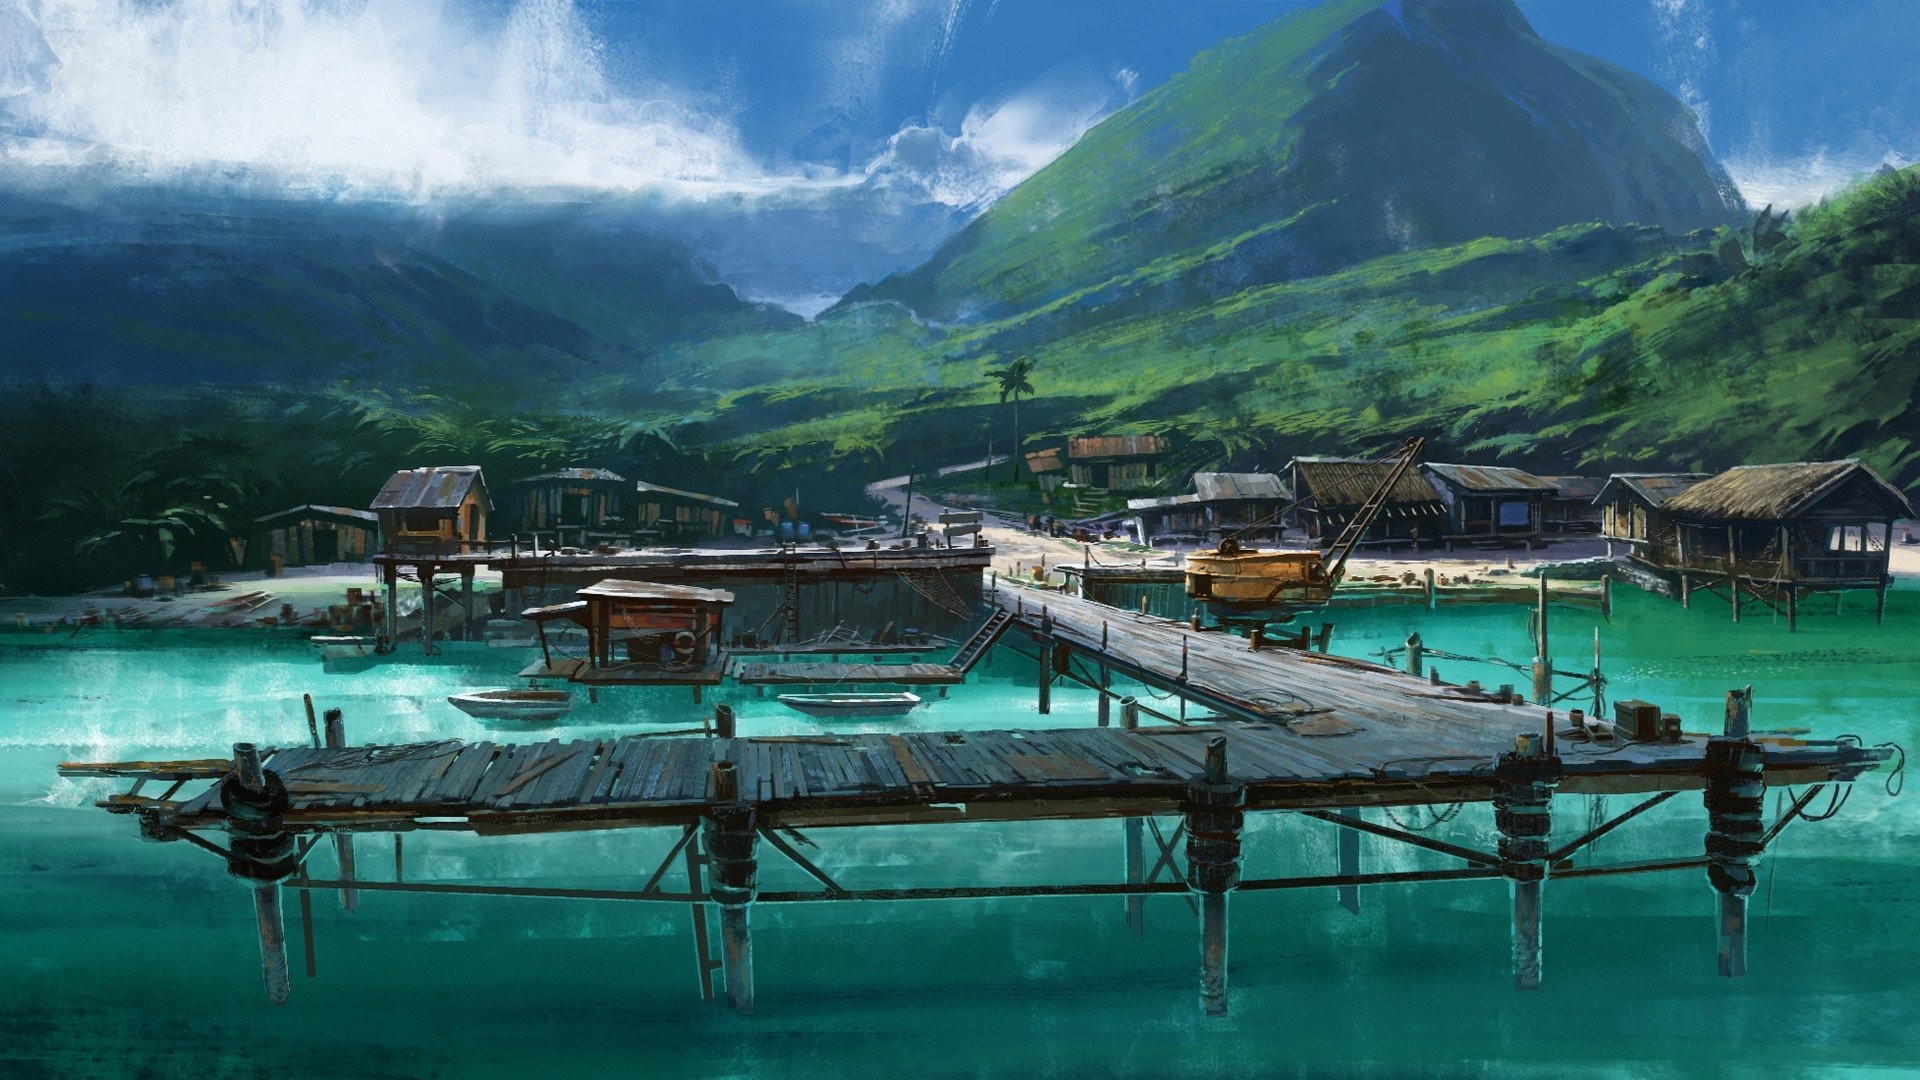 Artwork Boats Dock Drawings Far Cry 3 Landscapes Mountains - Far Cry 3 Dock - HD Wallpaper 